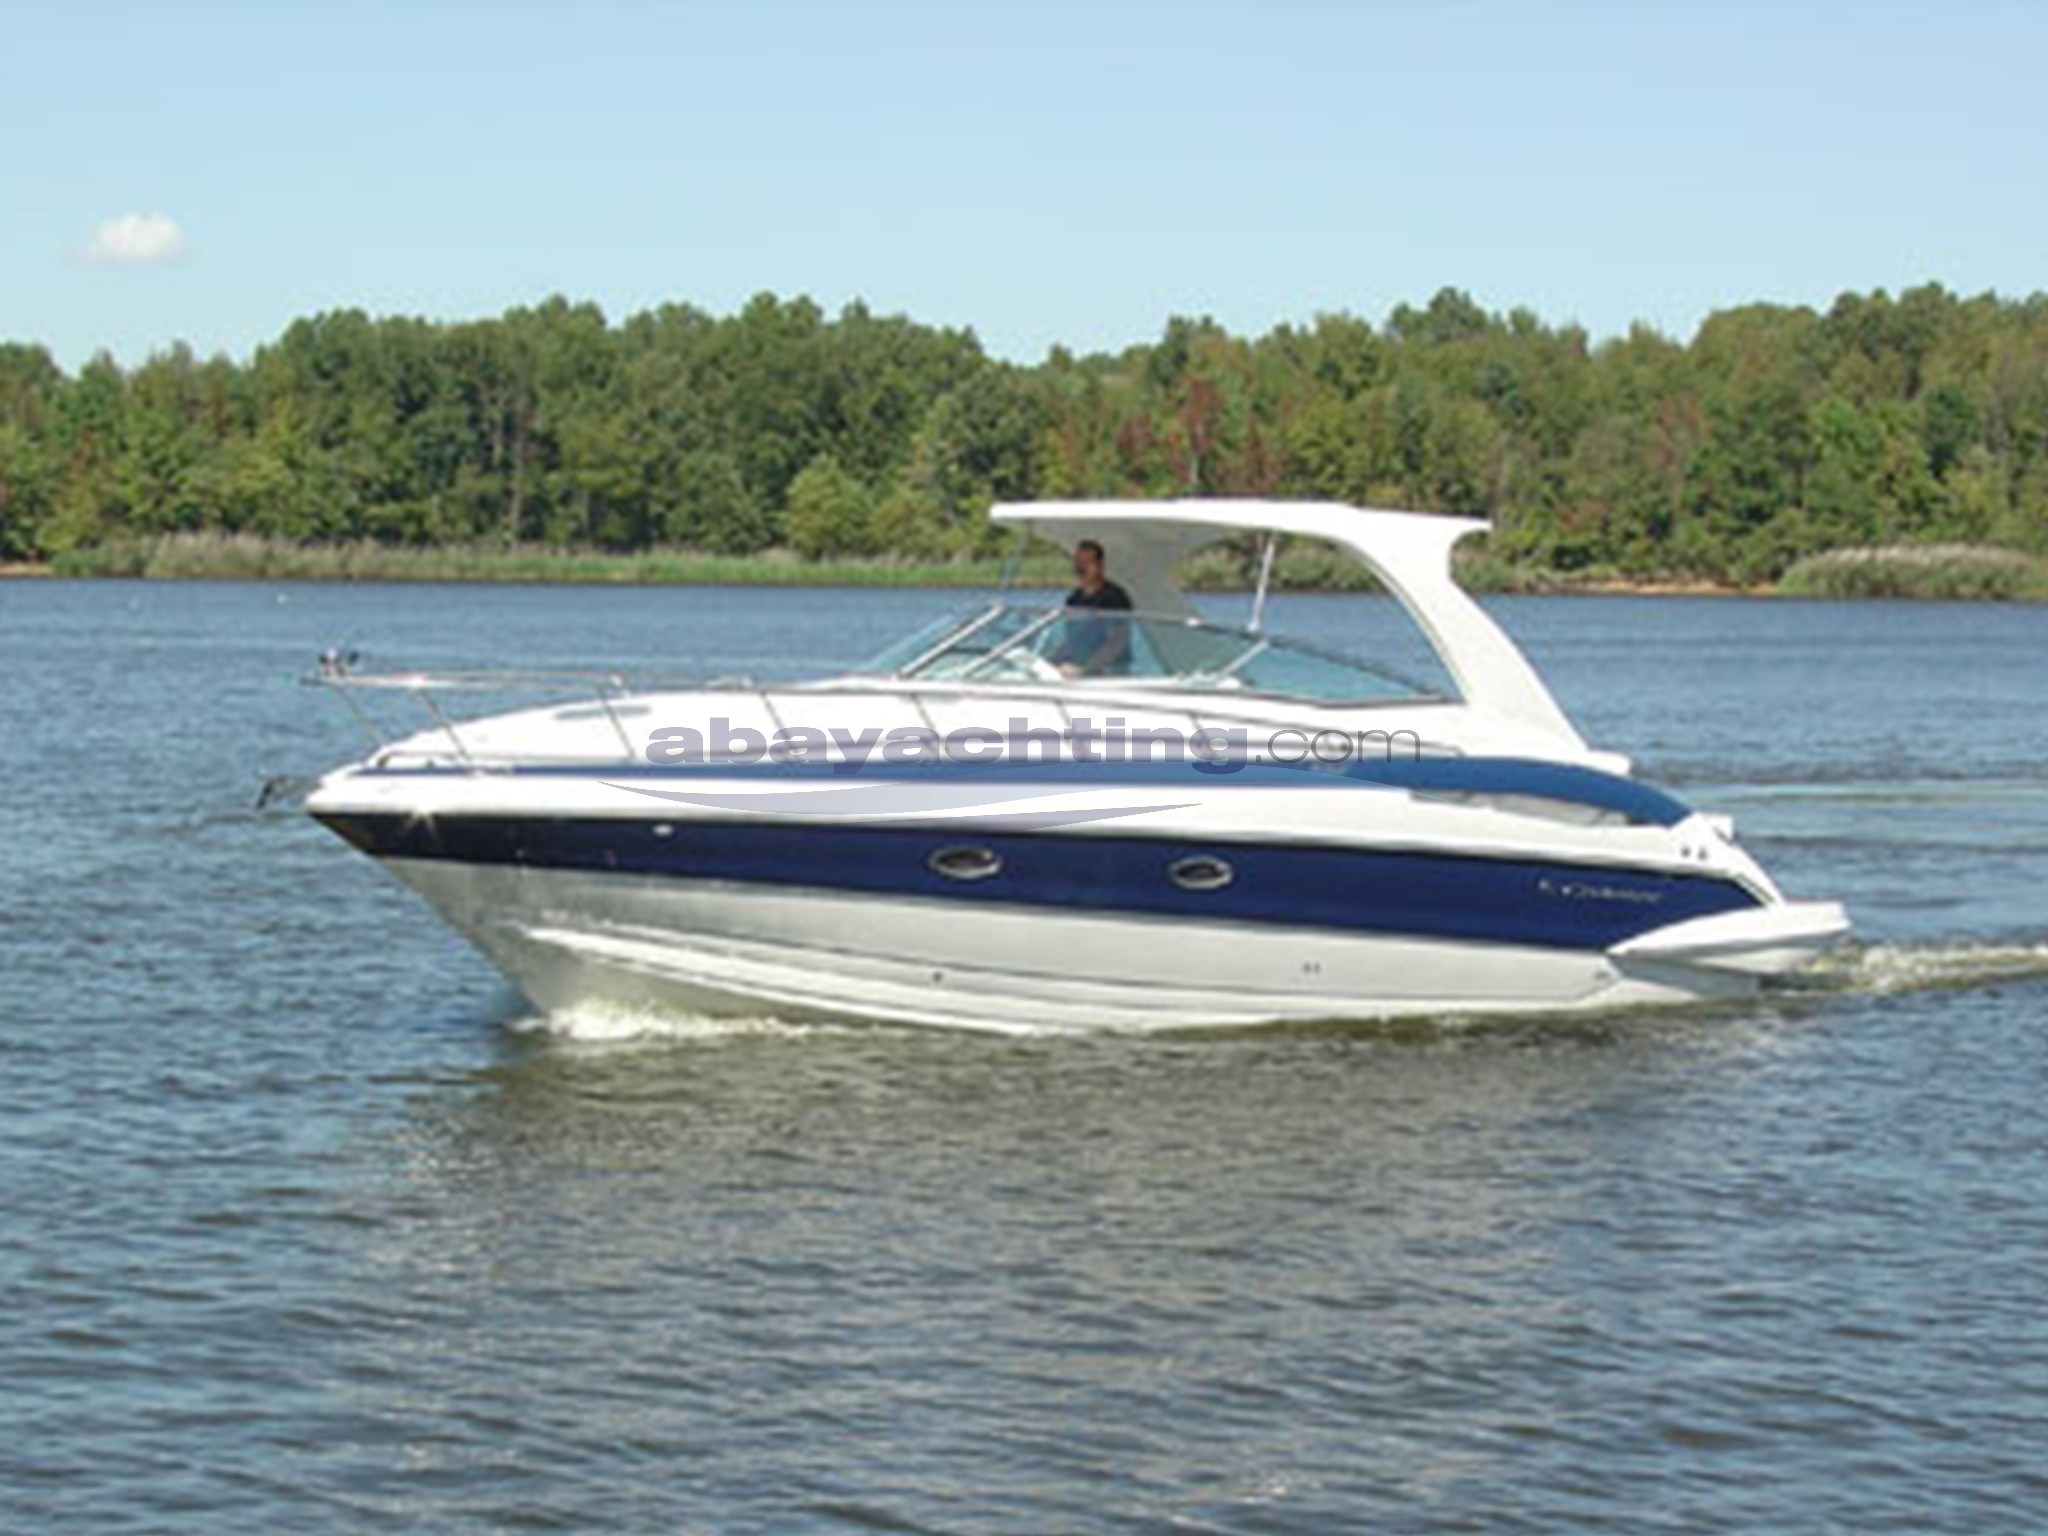 New arrival Crownline 340cr